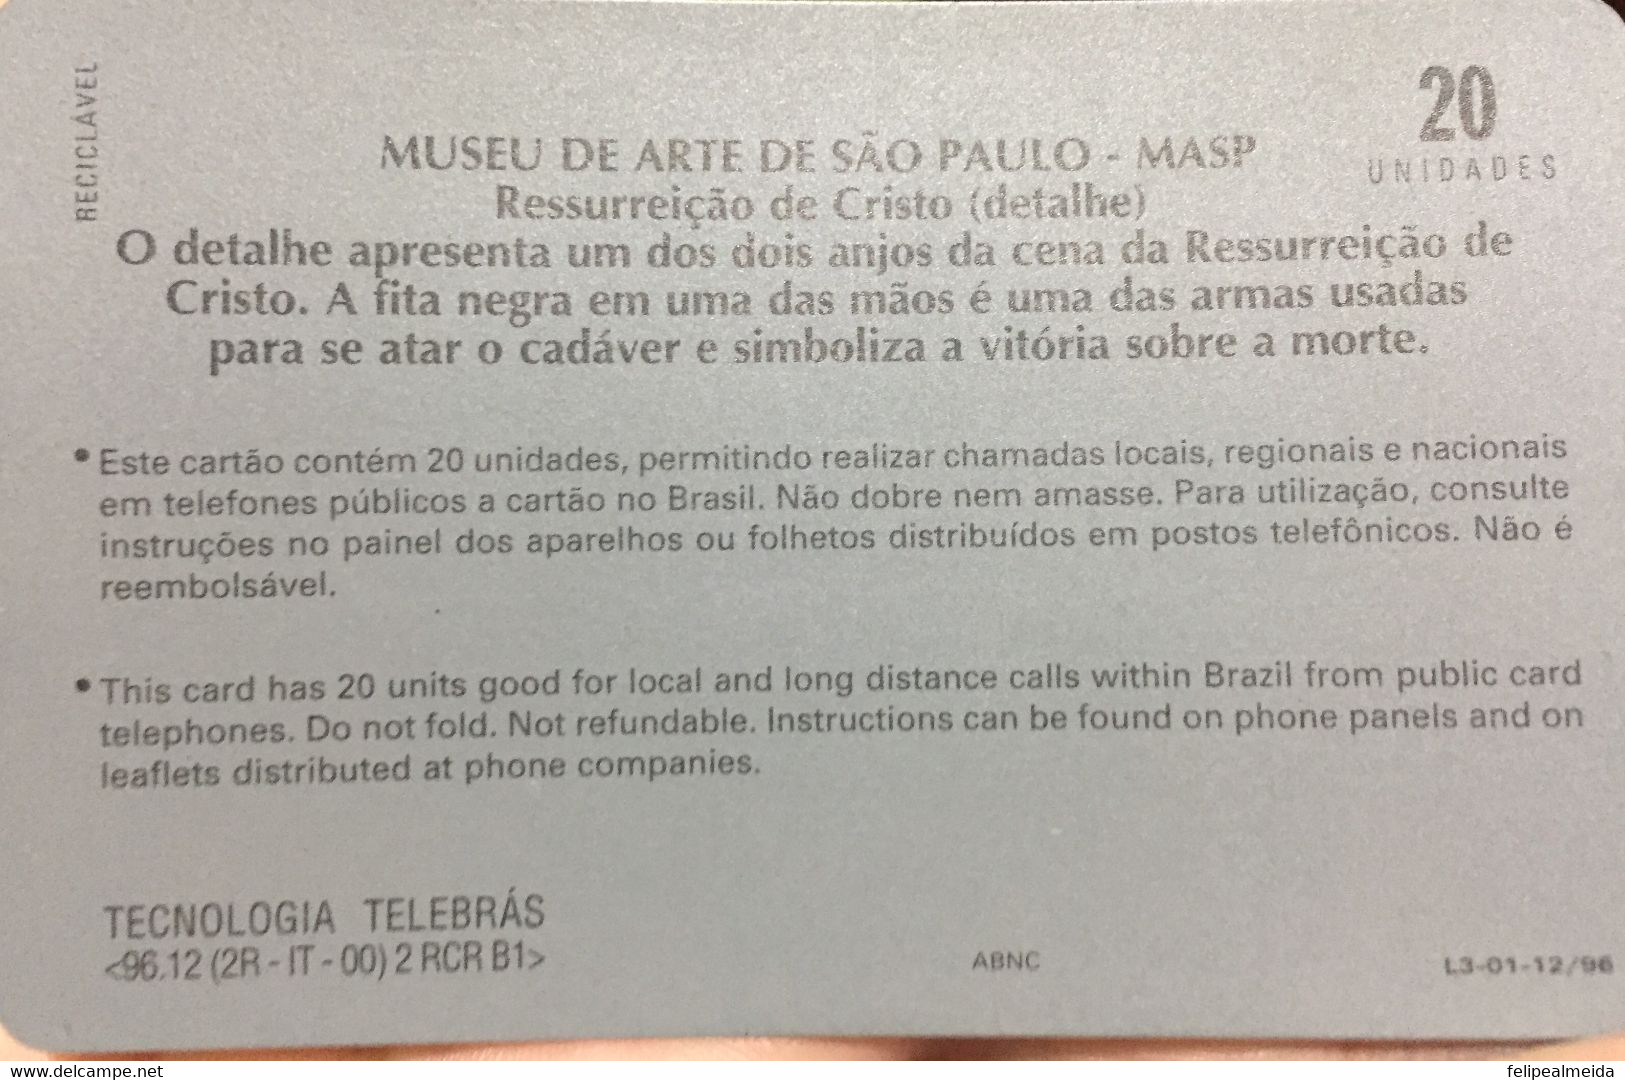 Phone Card Manufactured By Telebras In 1996 - Homage To The São Paulo Museum Of Art - Masb, This Is The Fragment Of - Peinture